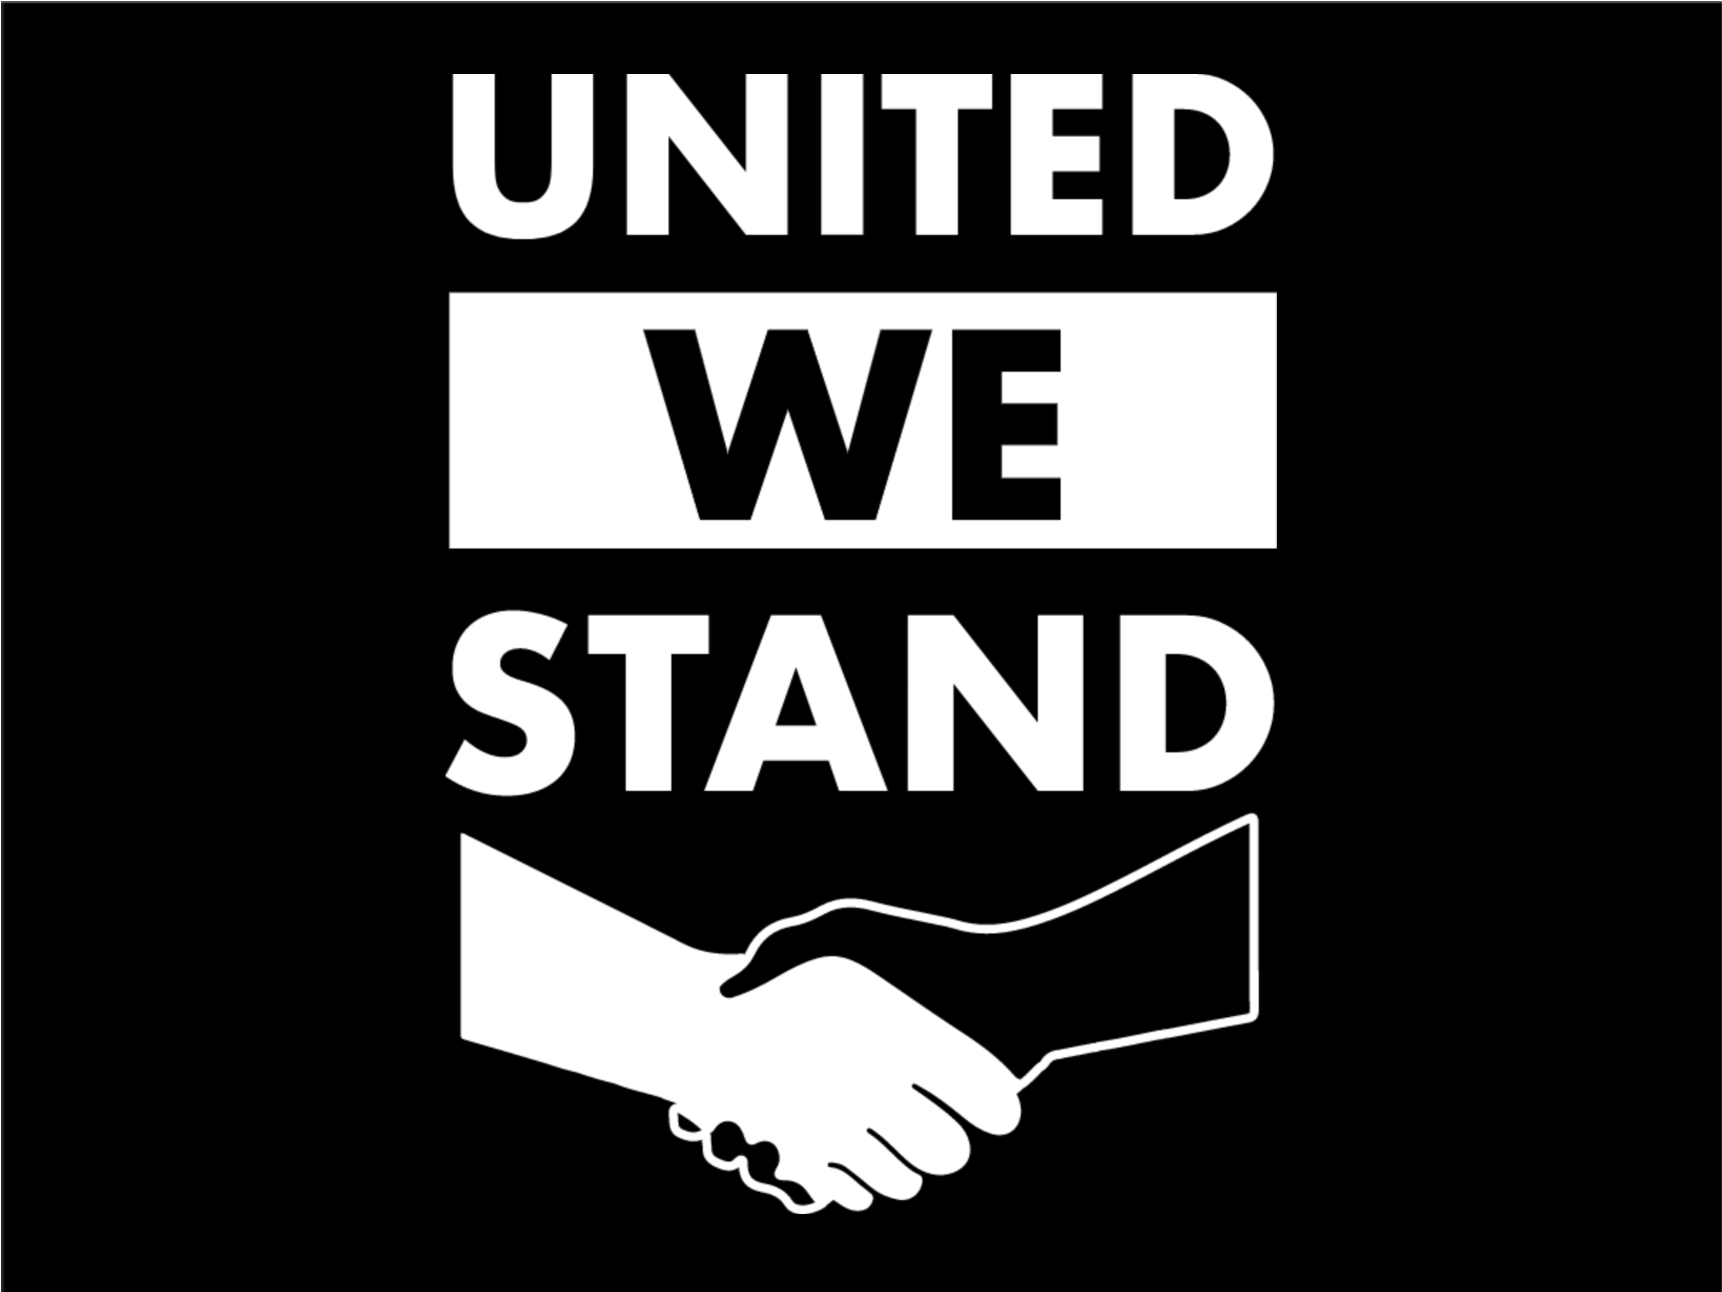 Yard Sign, Social Issues - 18 x 24 - Tags: united, we, stand, blm, black, lives, matter, justice, sjw